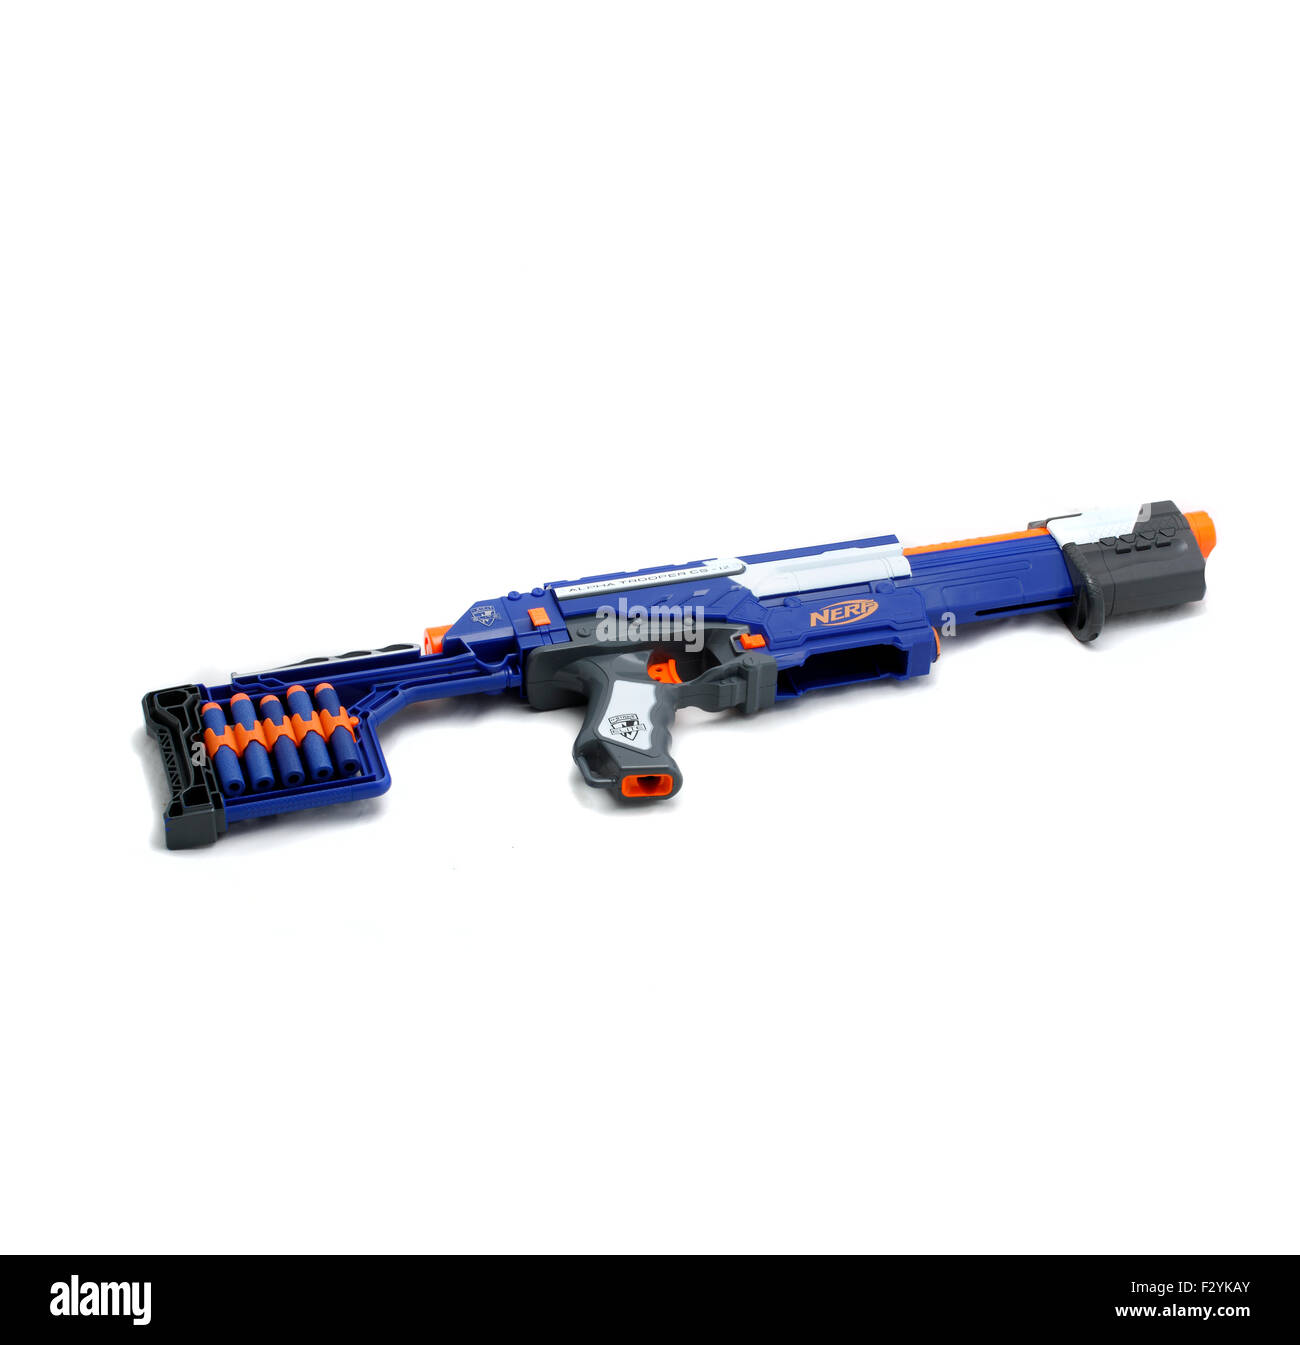 Nerf toys logo editorial photo. Image of games, commercial - 114319371